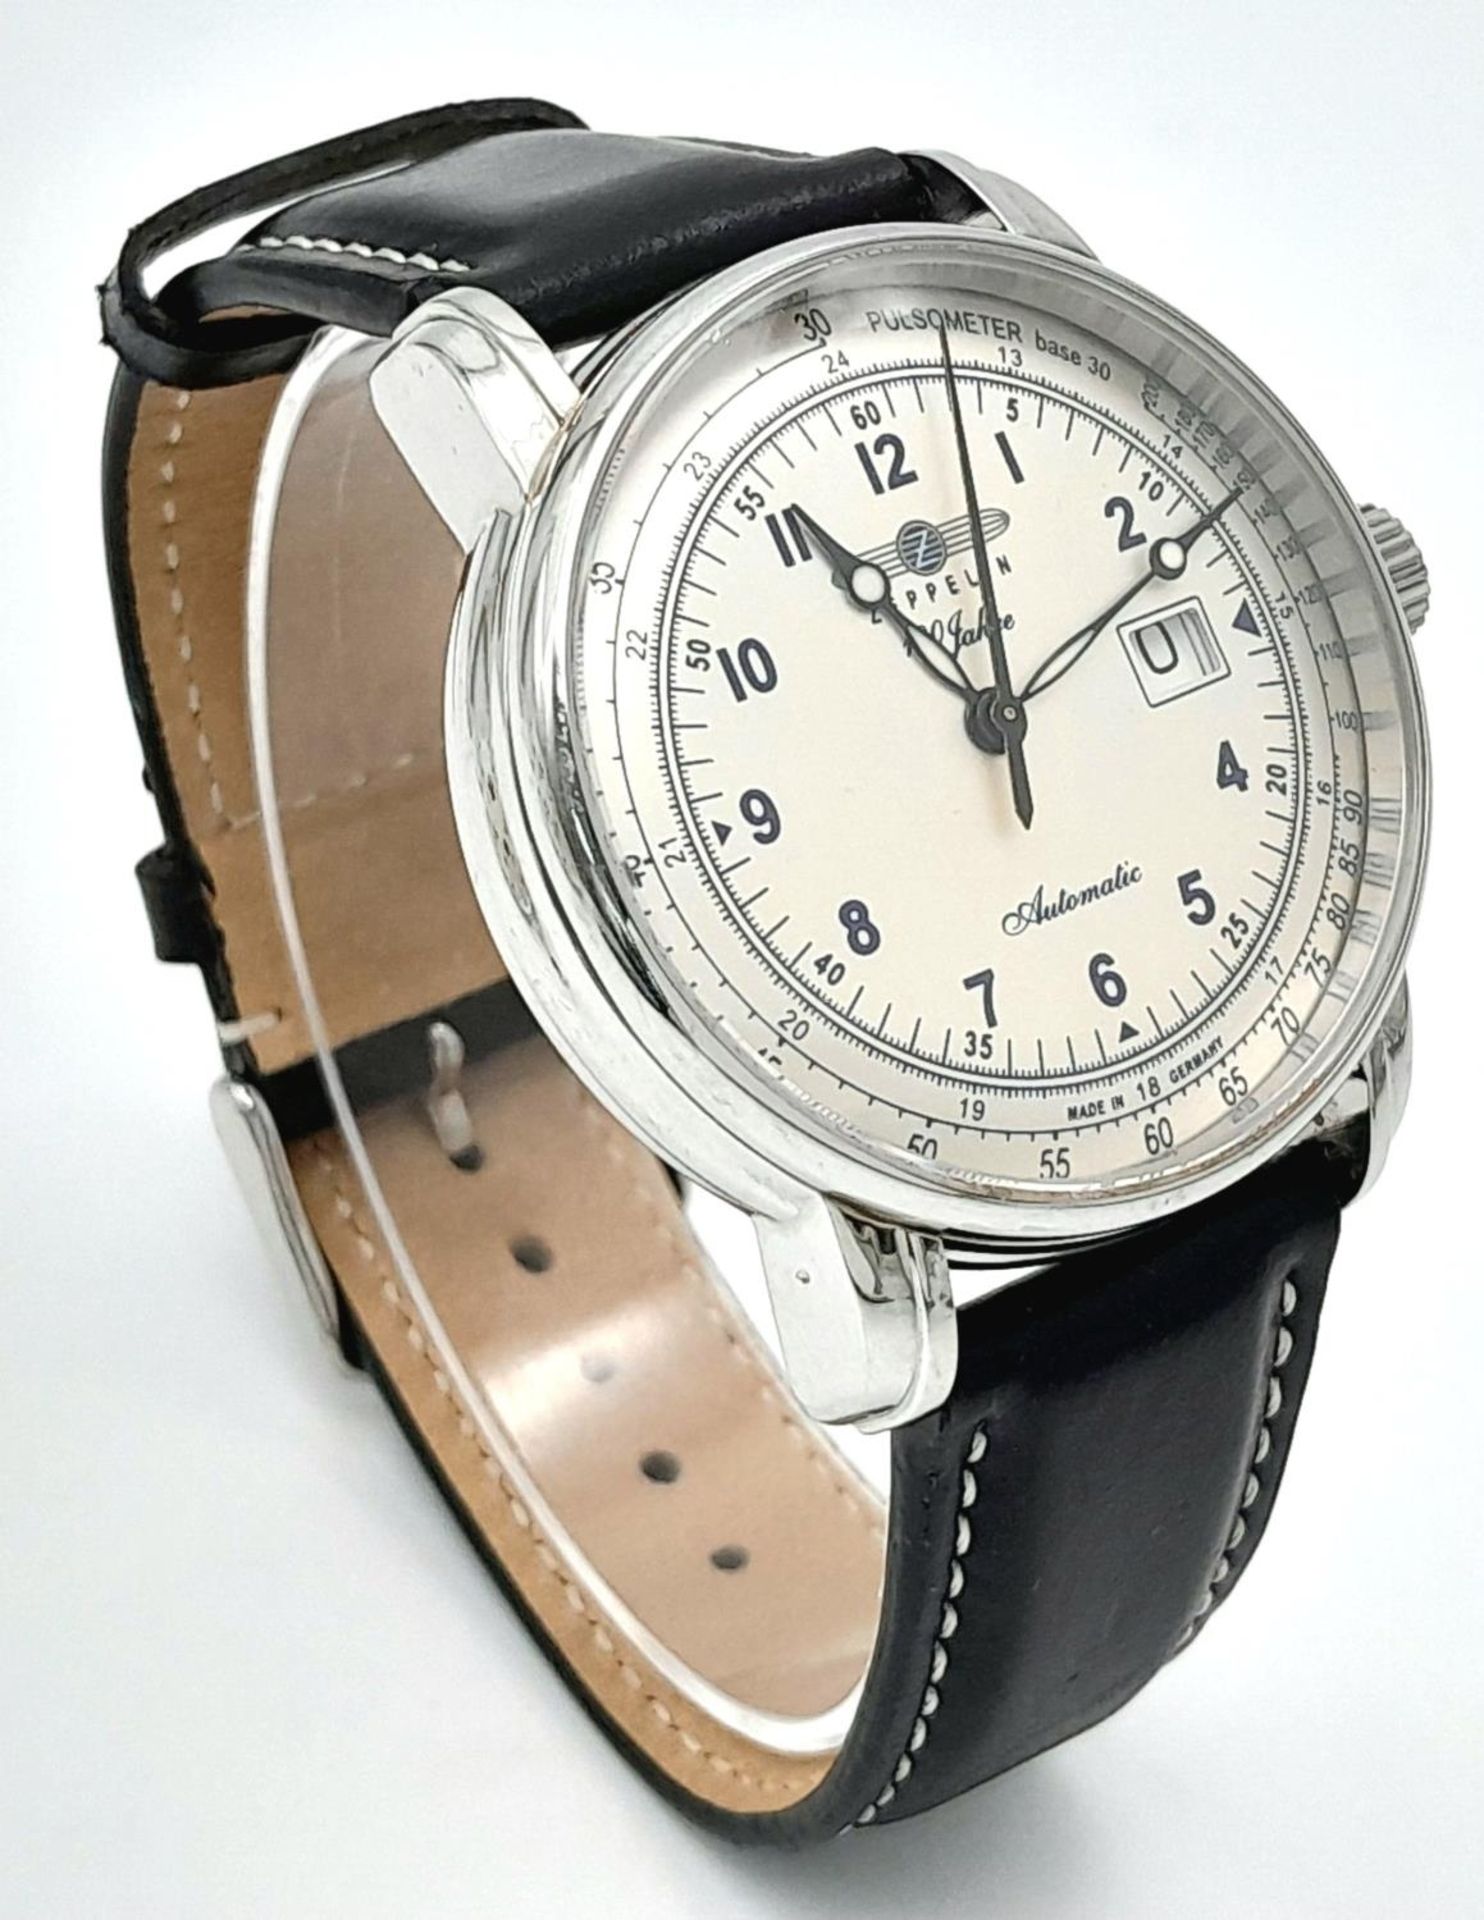 A Zeppelin Automatic Gents Watch. Black leather strap. Stainless steel case - 42mm. White dial - Bild 3 aus 6